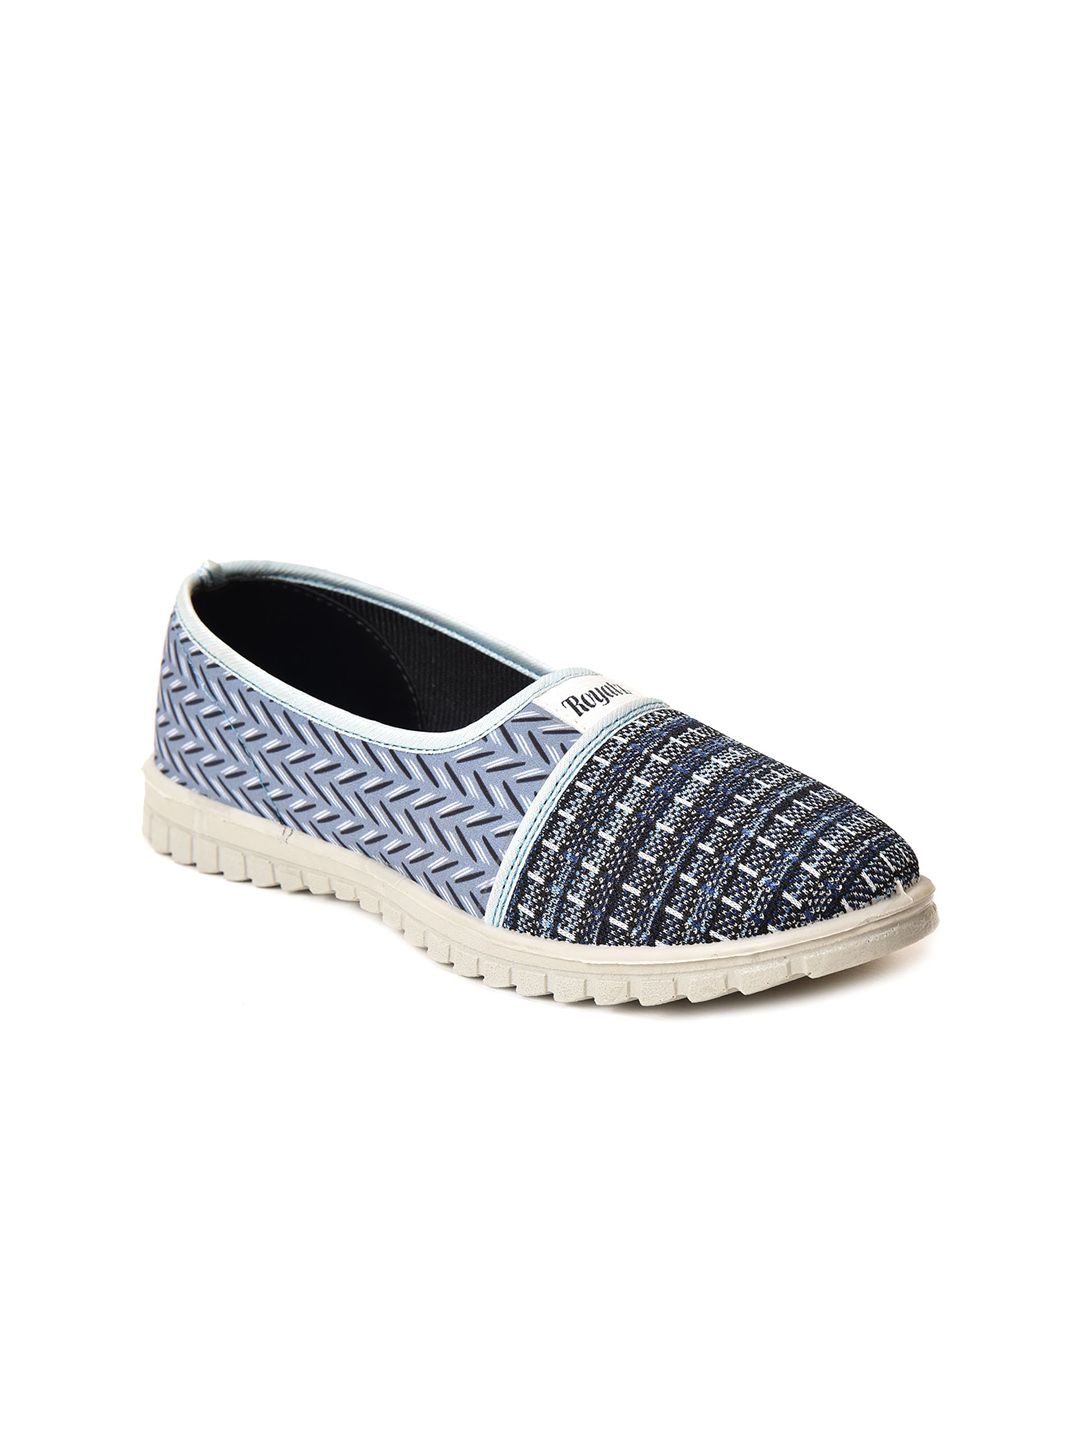 Ajanta Women Printed Lightweight Comfort Insole Contrast Sole Slip-On Sneakers Price in India